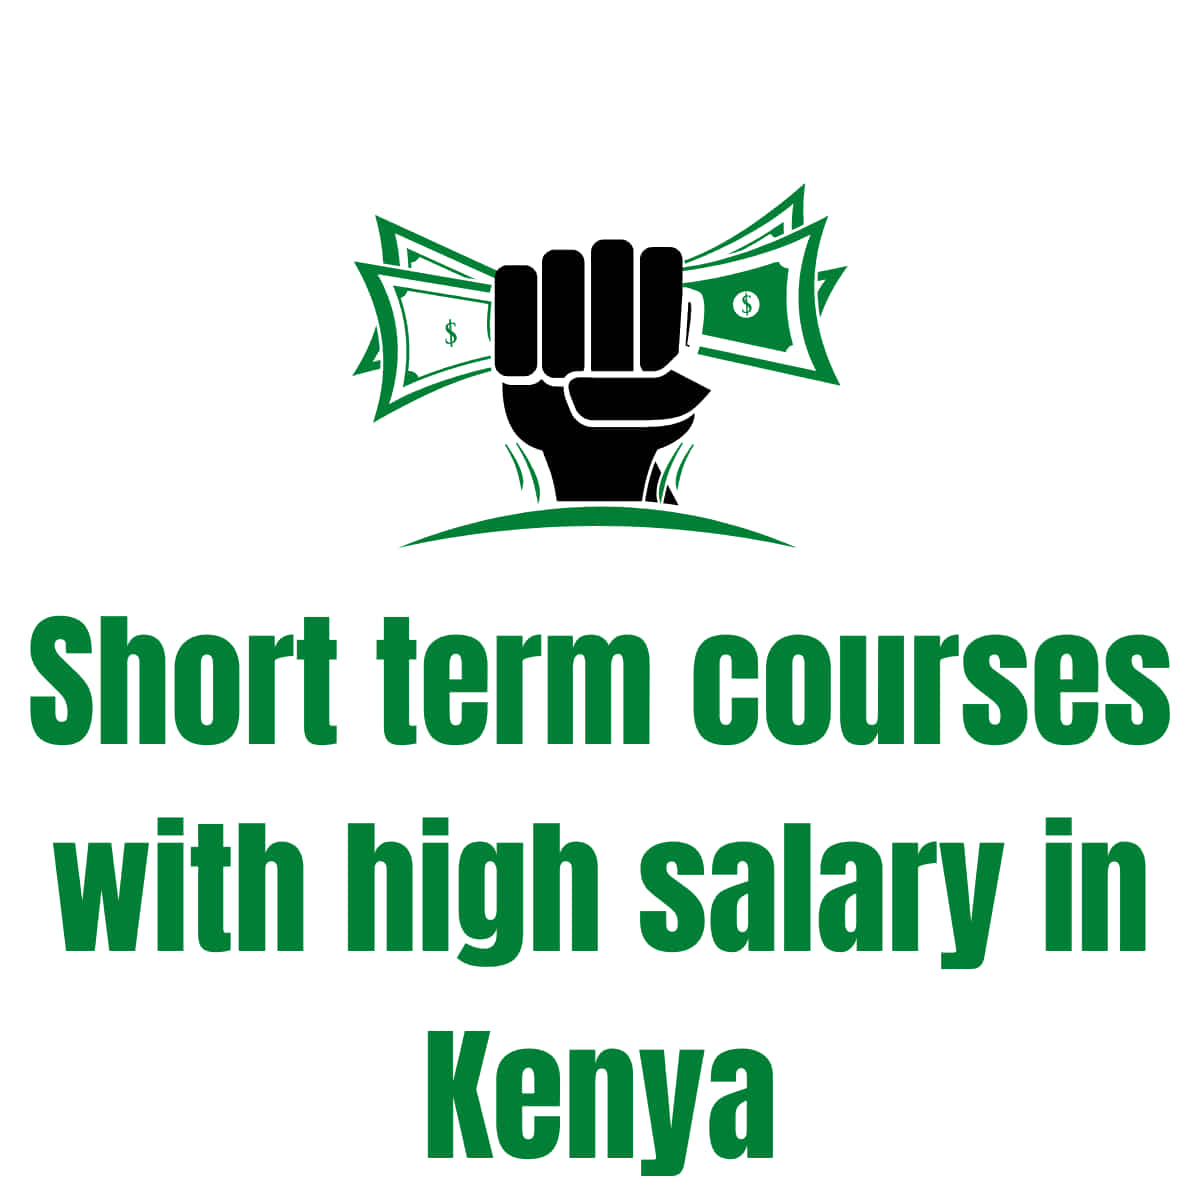 Short term courses with high salary in Kenya